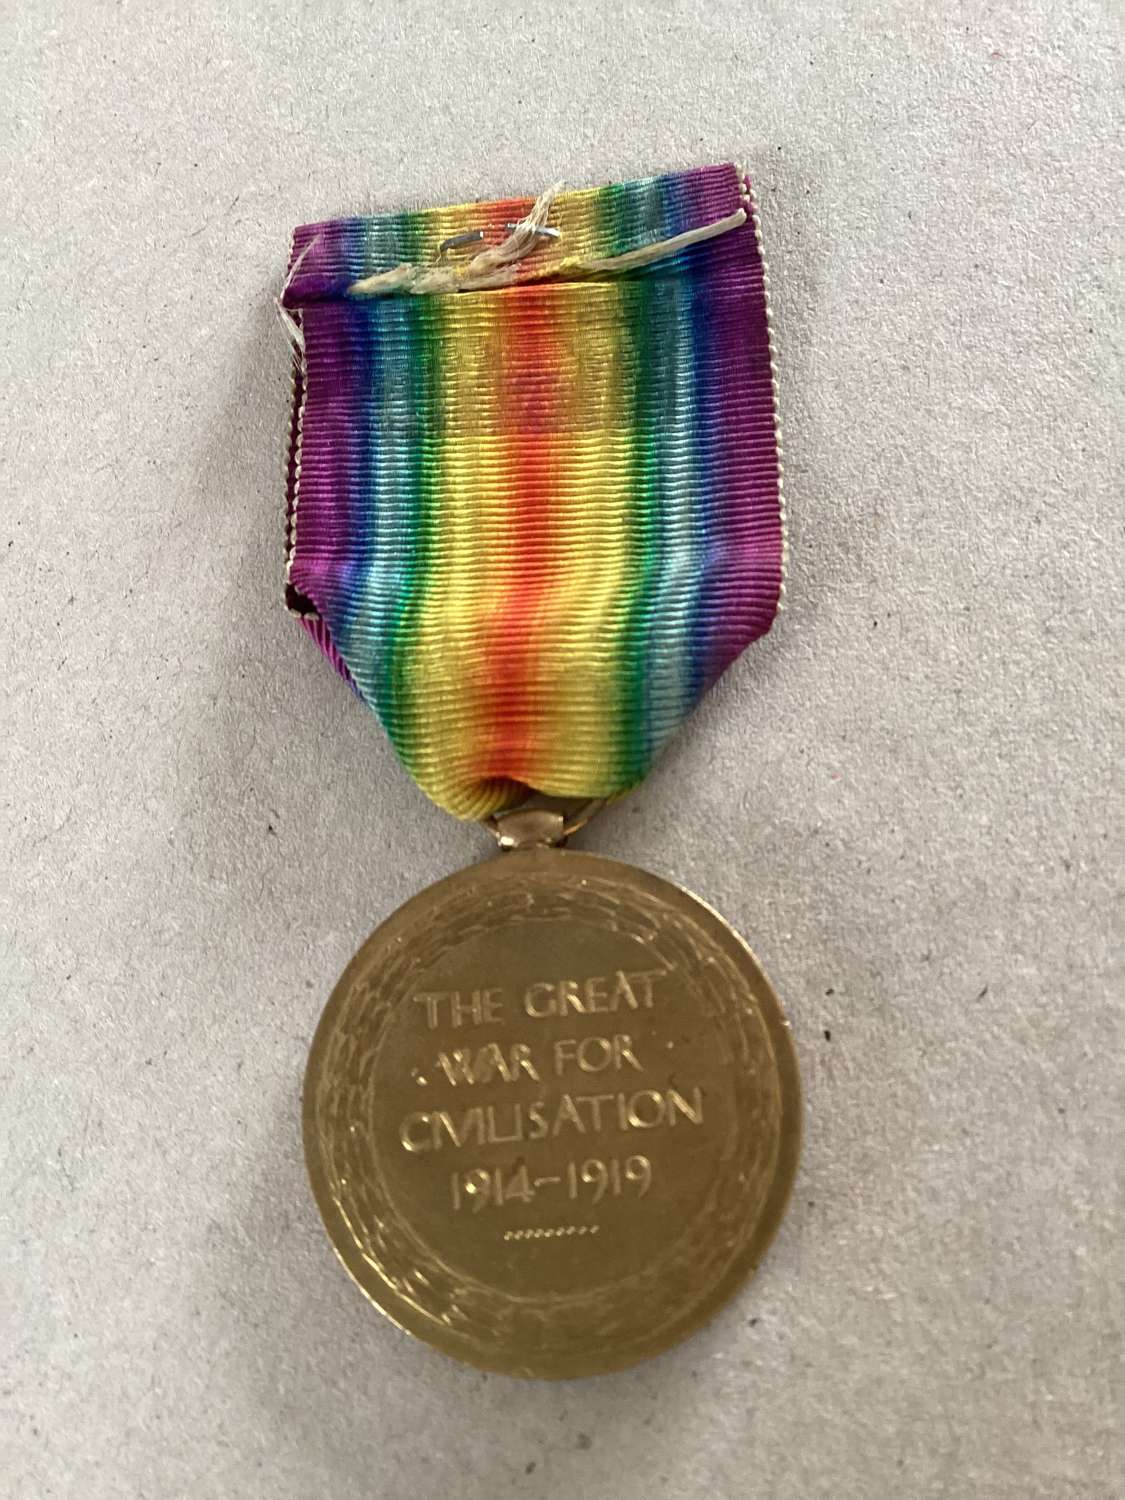  Victory medals -(107605 Cpl. J. Simpson MGC).